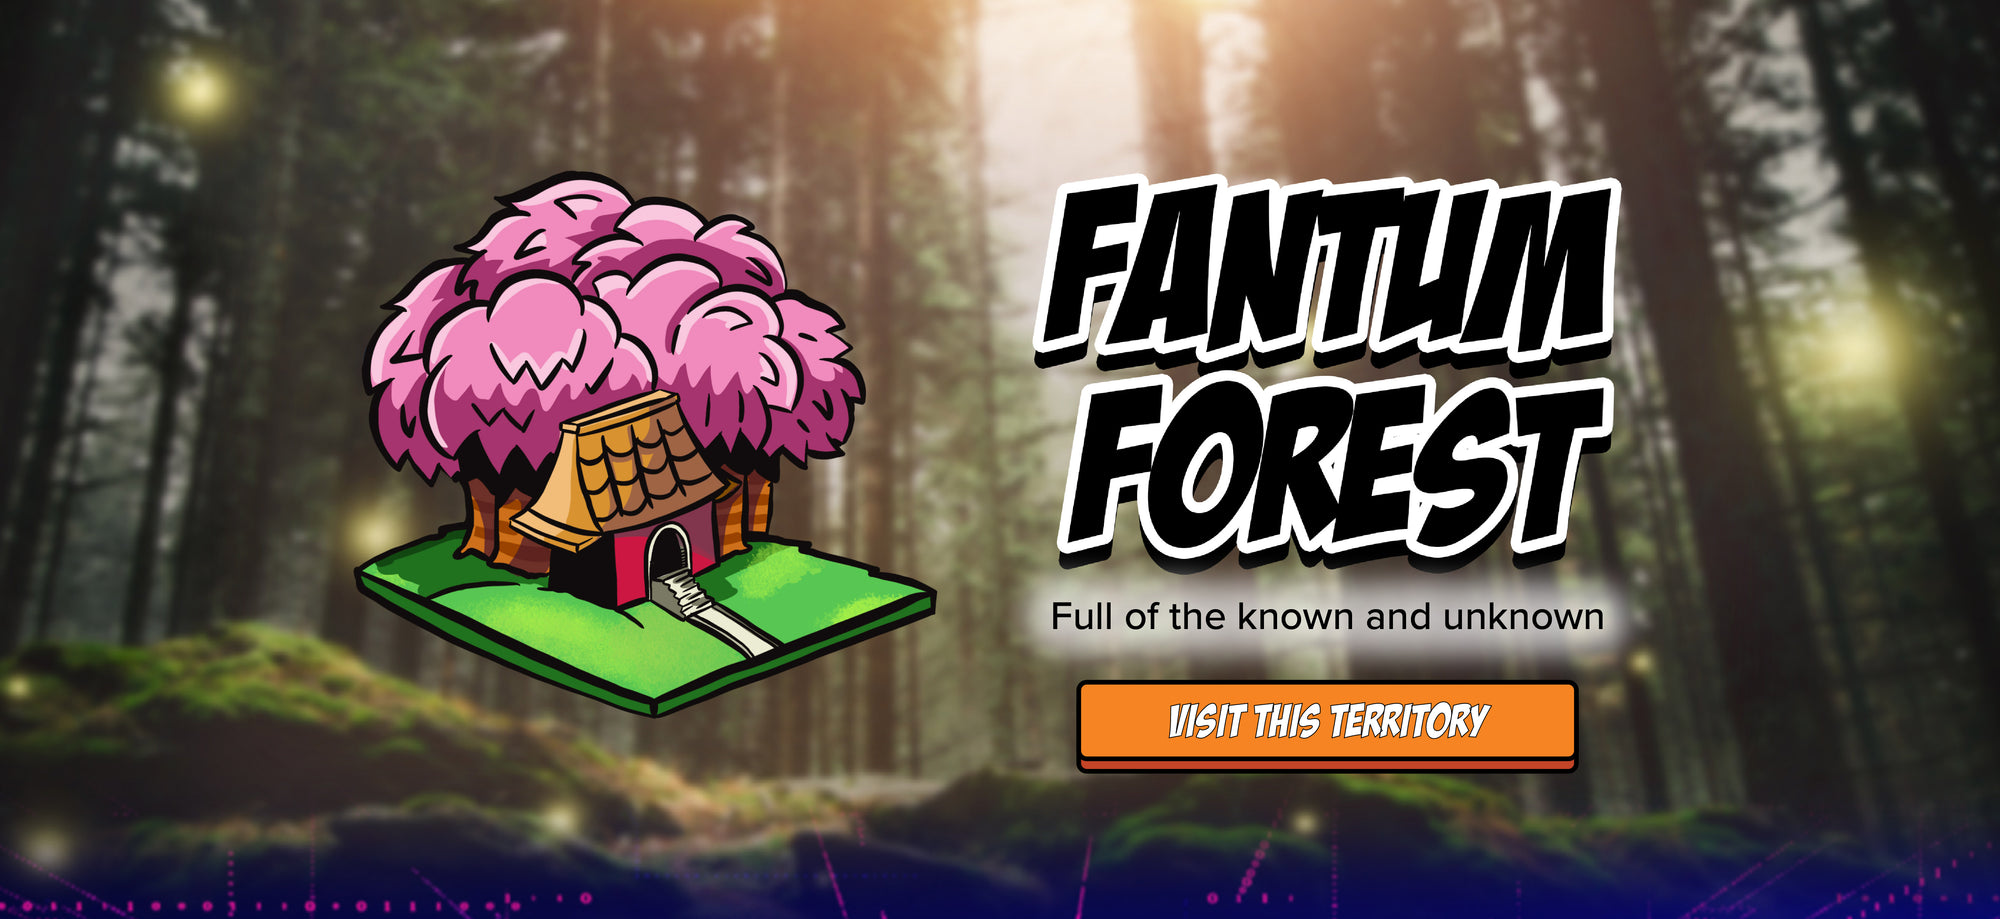 Realistic image of mystical forest with illustrated image of Fantum Forest in the foreground and the words "Fantum Forest, full of the known and unknown", and a button with the words "visit this territory"